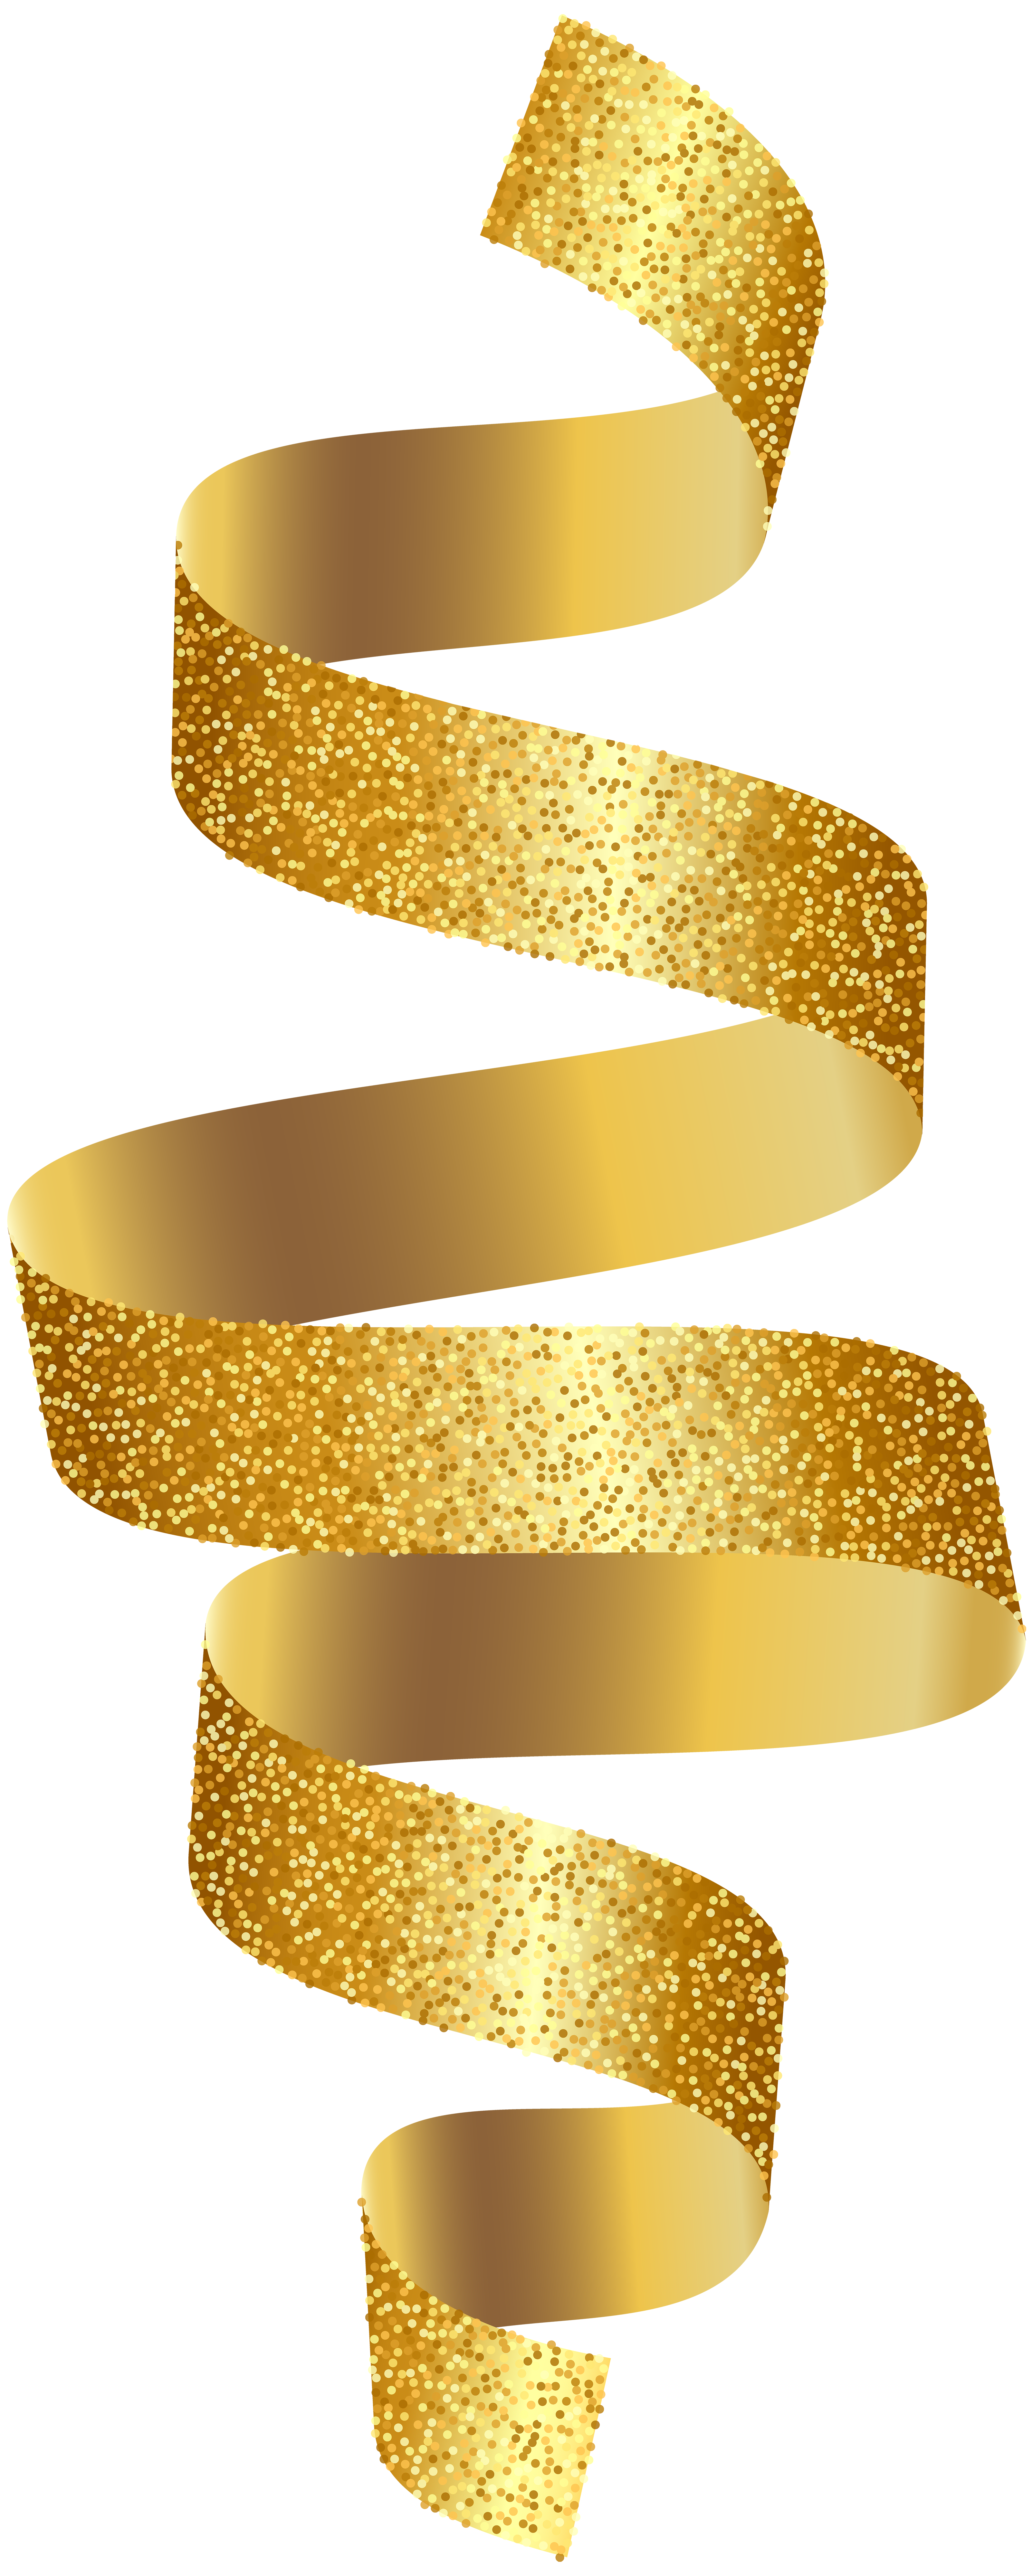 Long Golden Ribbon, Gold Ribbon, Golden Ribbon, Ribbon PNG Transparent  Image and Clipart for Free Download